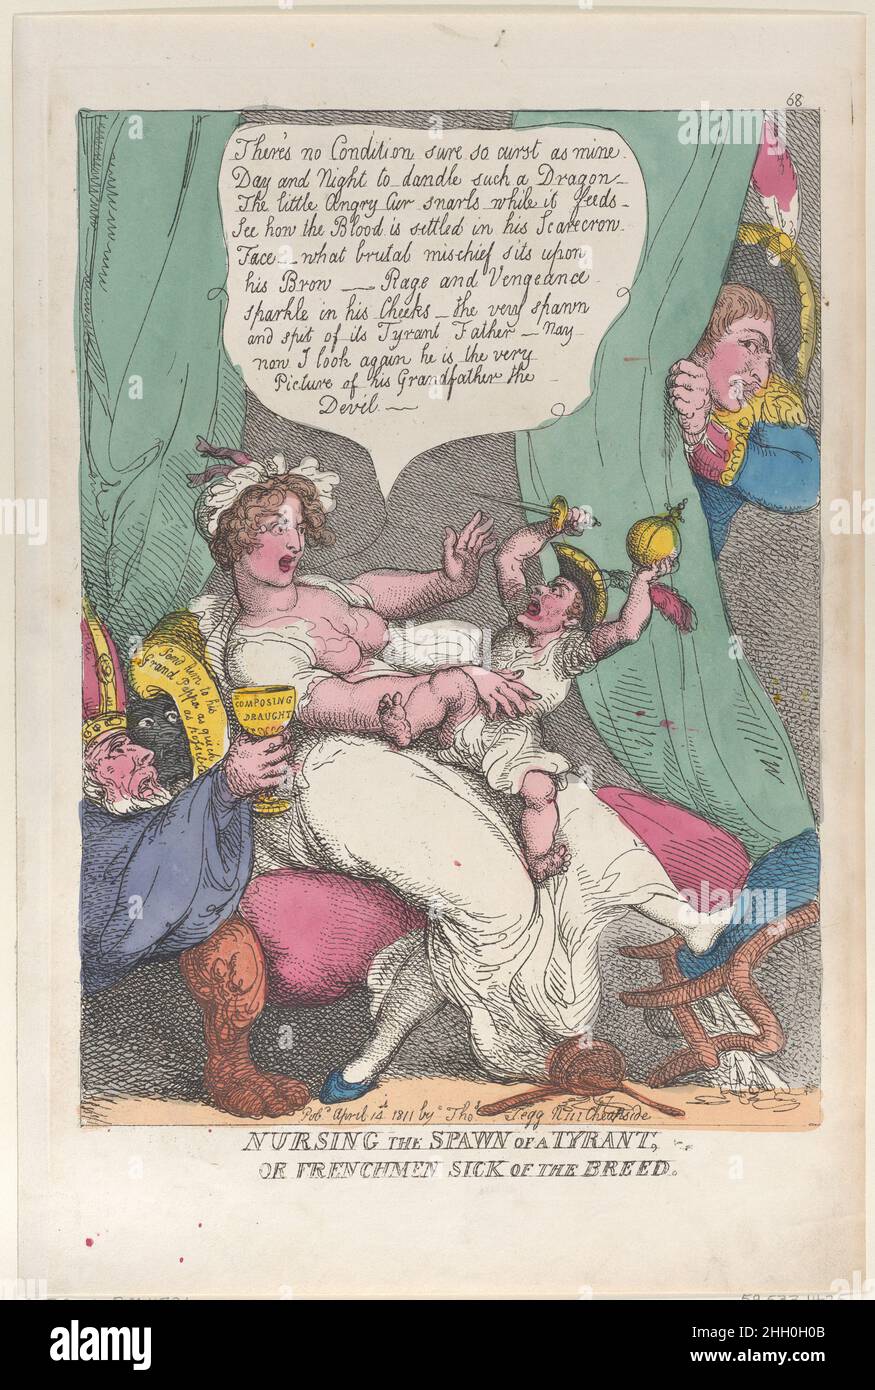 Nursing the Spawn of a Tyrant April 14, 1811 Thomas Rowlandson Marie Louise recoils from her infant son, seated in her lap, who threatens her with a dagger. Napoleon hides behind a curtain at right. A bishop at left raises a goblet inscribed 'Composing Draught' to the Empress.. Nursing the Spawn of a Tyrant. Thomas Rowlandson (British, London 1757–1827 London). April 14, 1811. Hand-colored etching. Thomas Tegg (British, 1776–1846). Prints Stock Photo